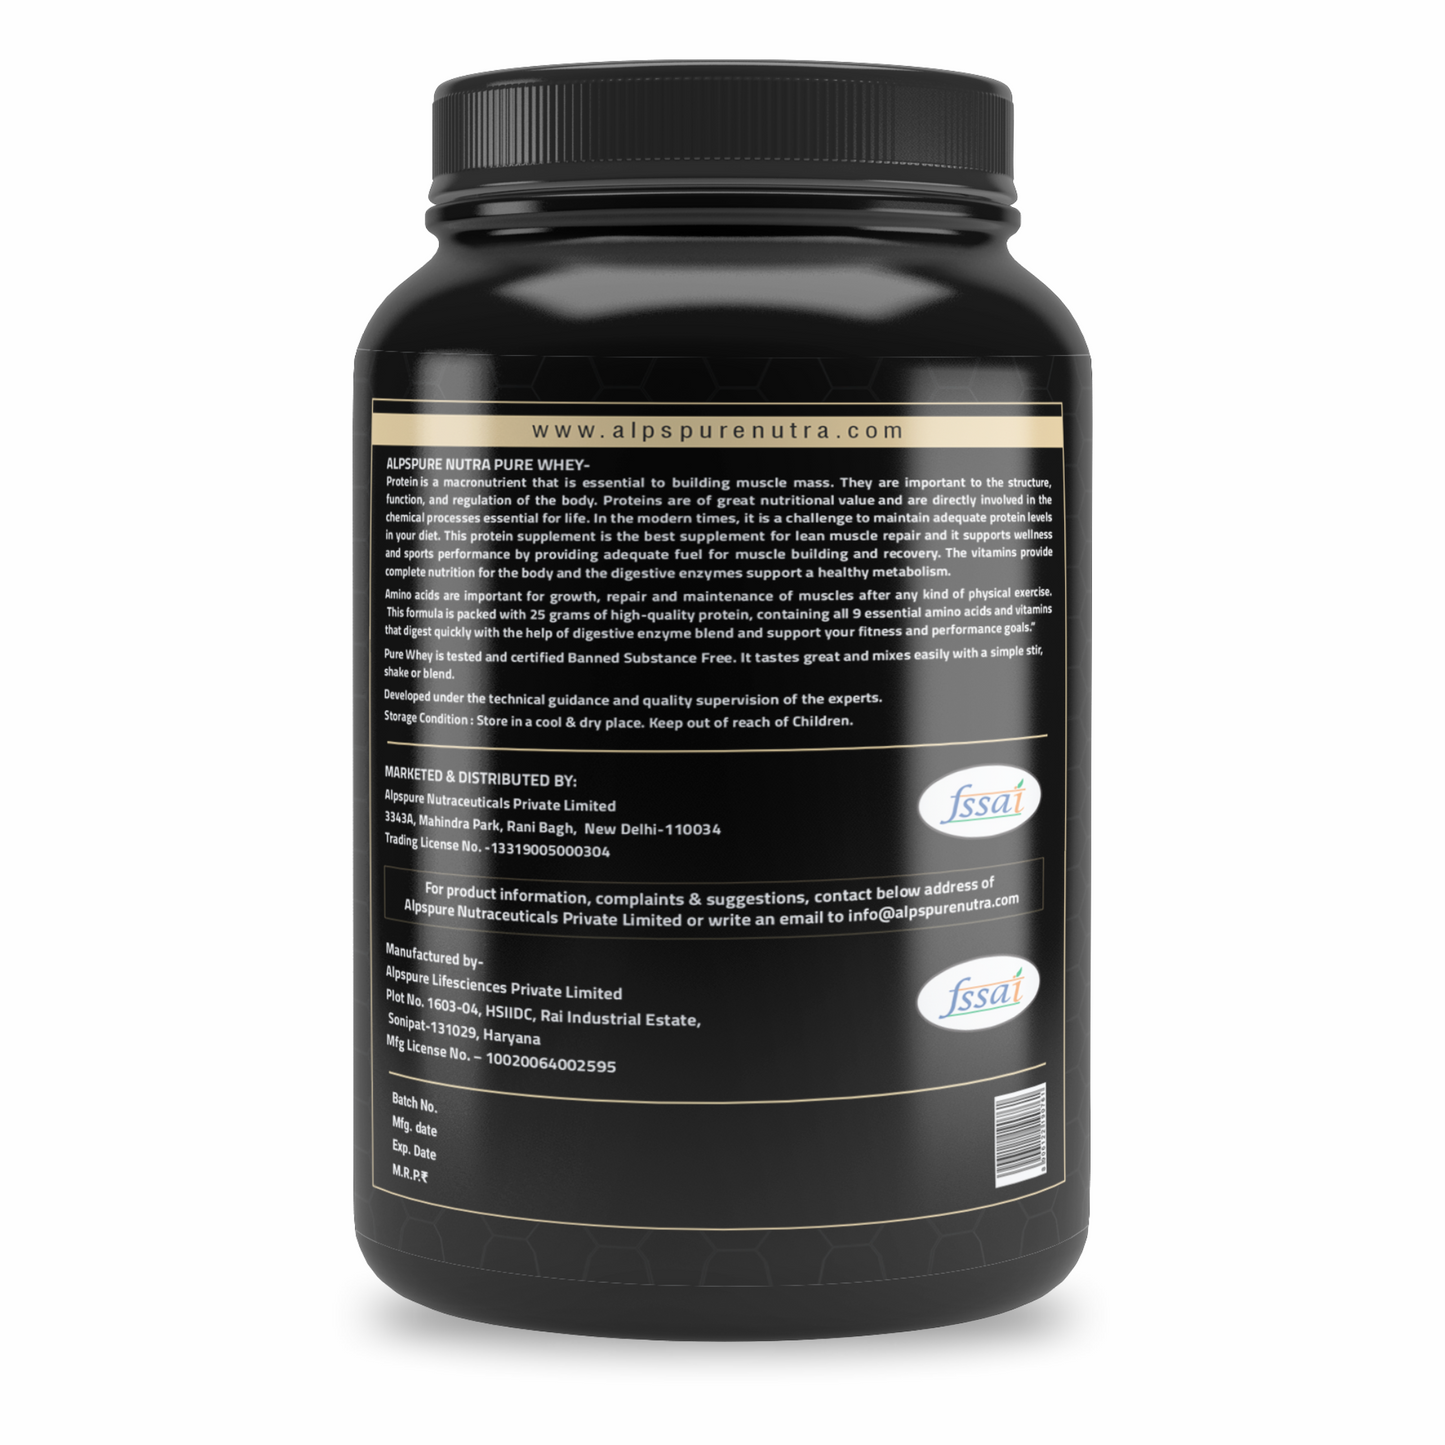 Premium Pure Whey Protein Powder for Optimal Muscle Building and Recovery - Boost Your Workouts with High-Quality Protein